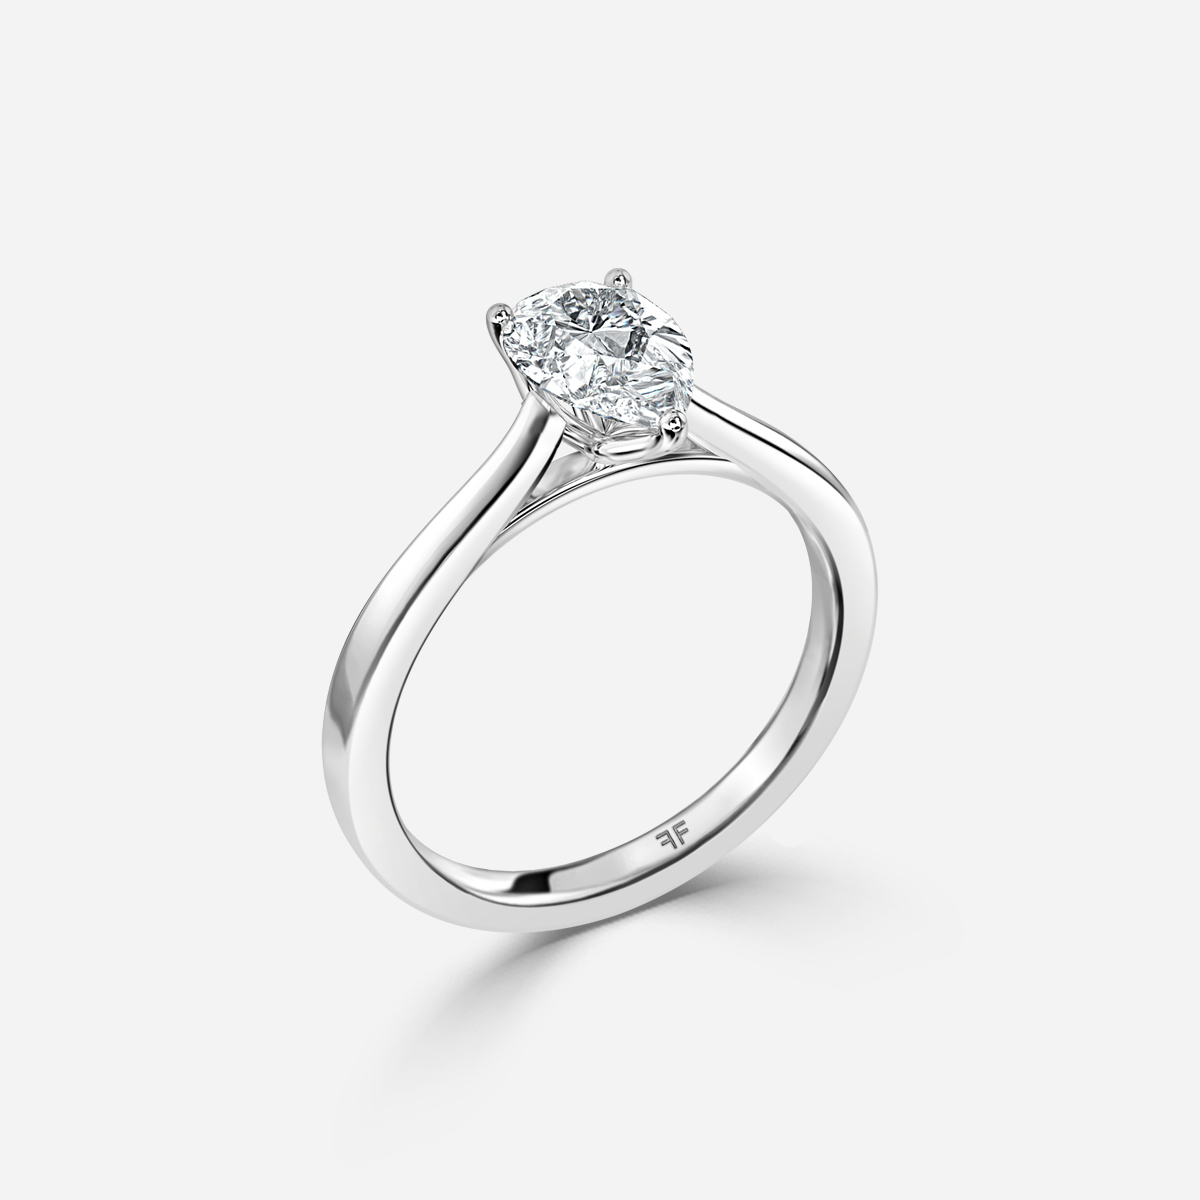 White Gold Petite Solitaire Engagement Ring